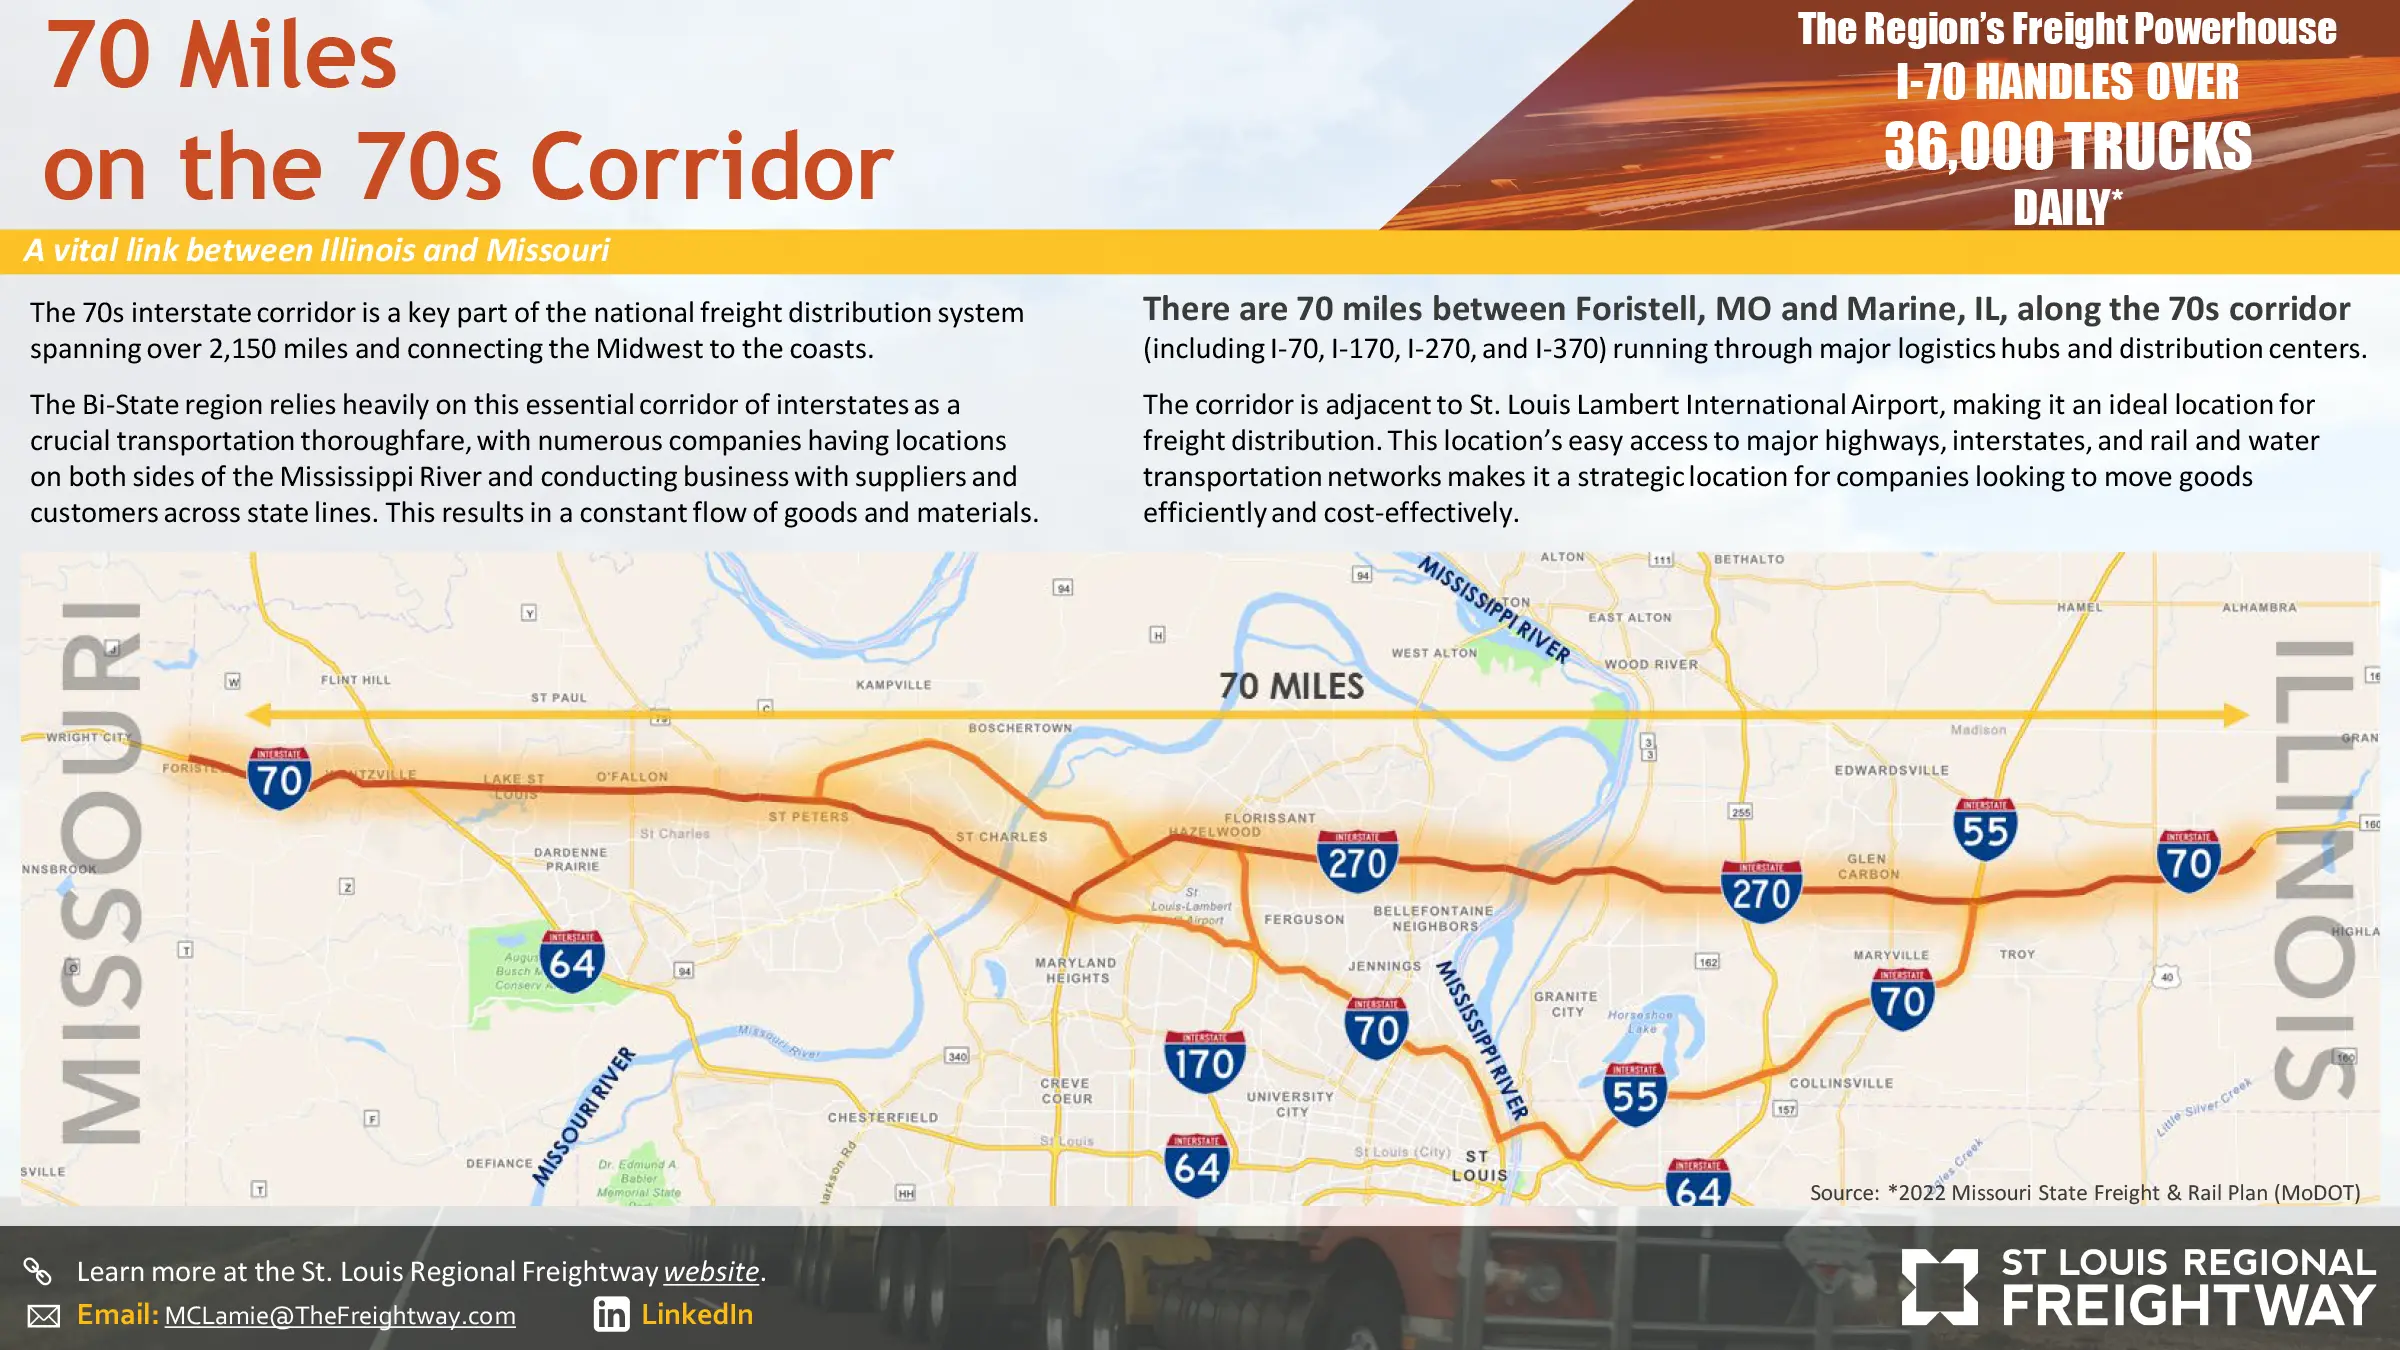 Cover slide of PDF Presentation titled 70 Miles on the 70s Corridor – A Vital Link Between Illinois and Missouri